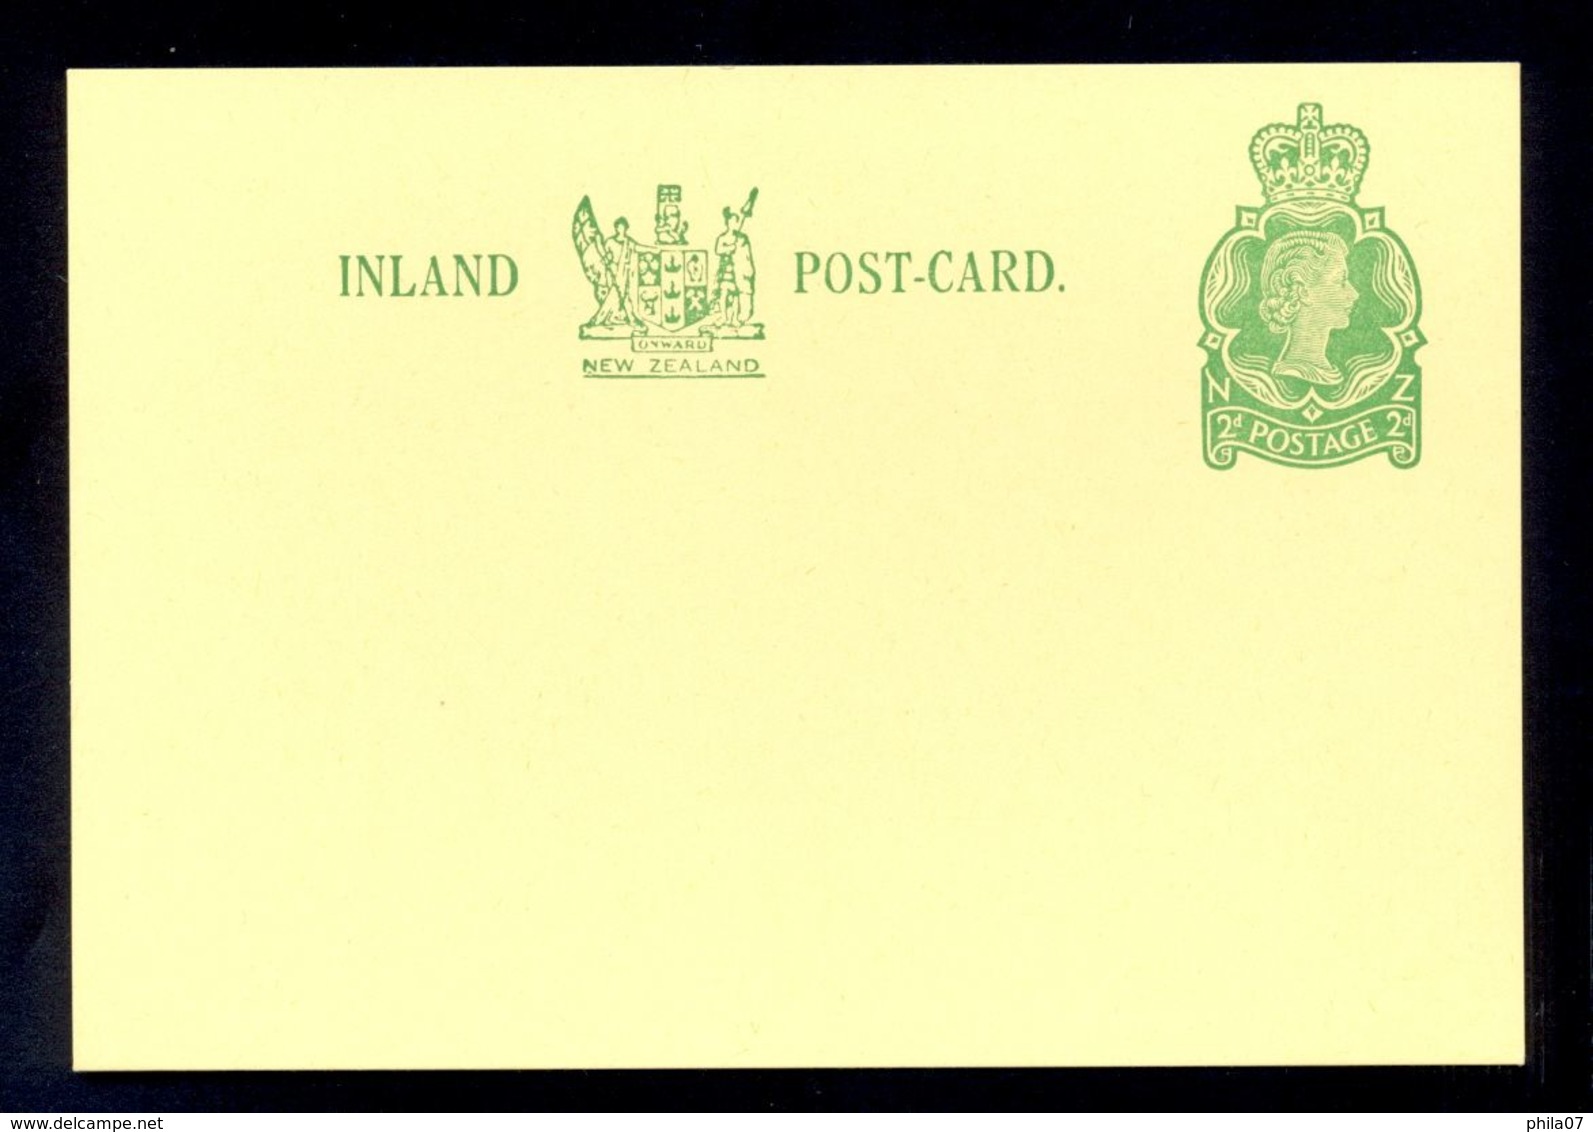 NEW ZEALAND - INLAND - Post-card With Imprinted Value, Not Traveled In Good Condition. - Entiers Postaux